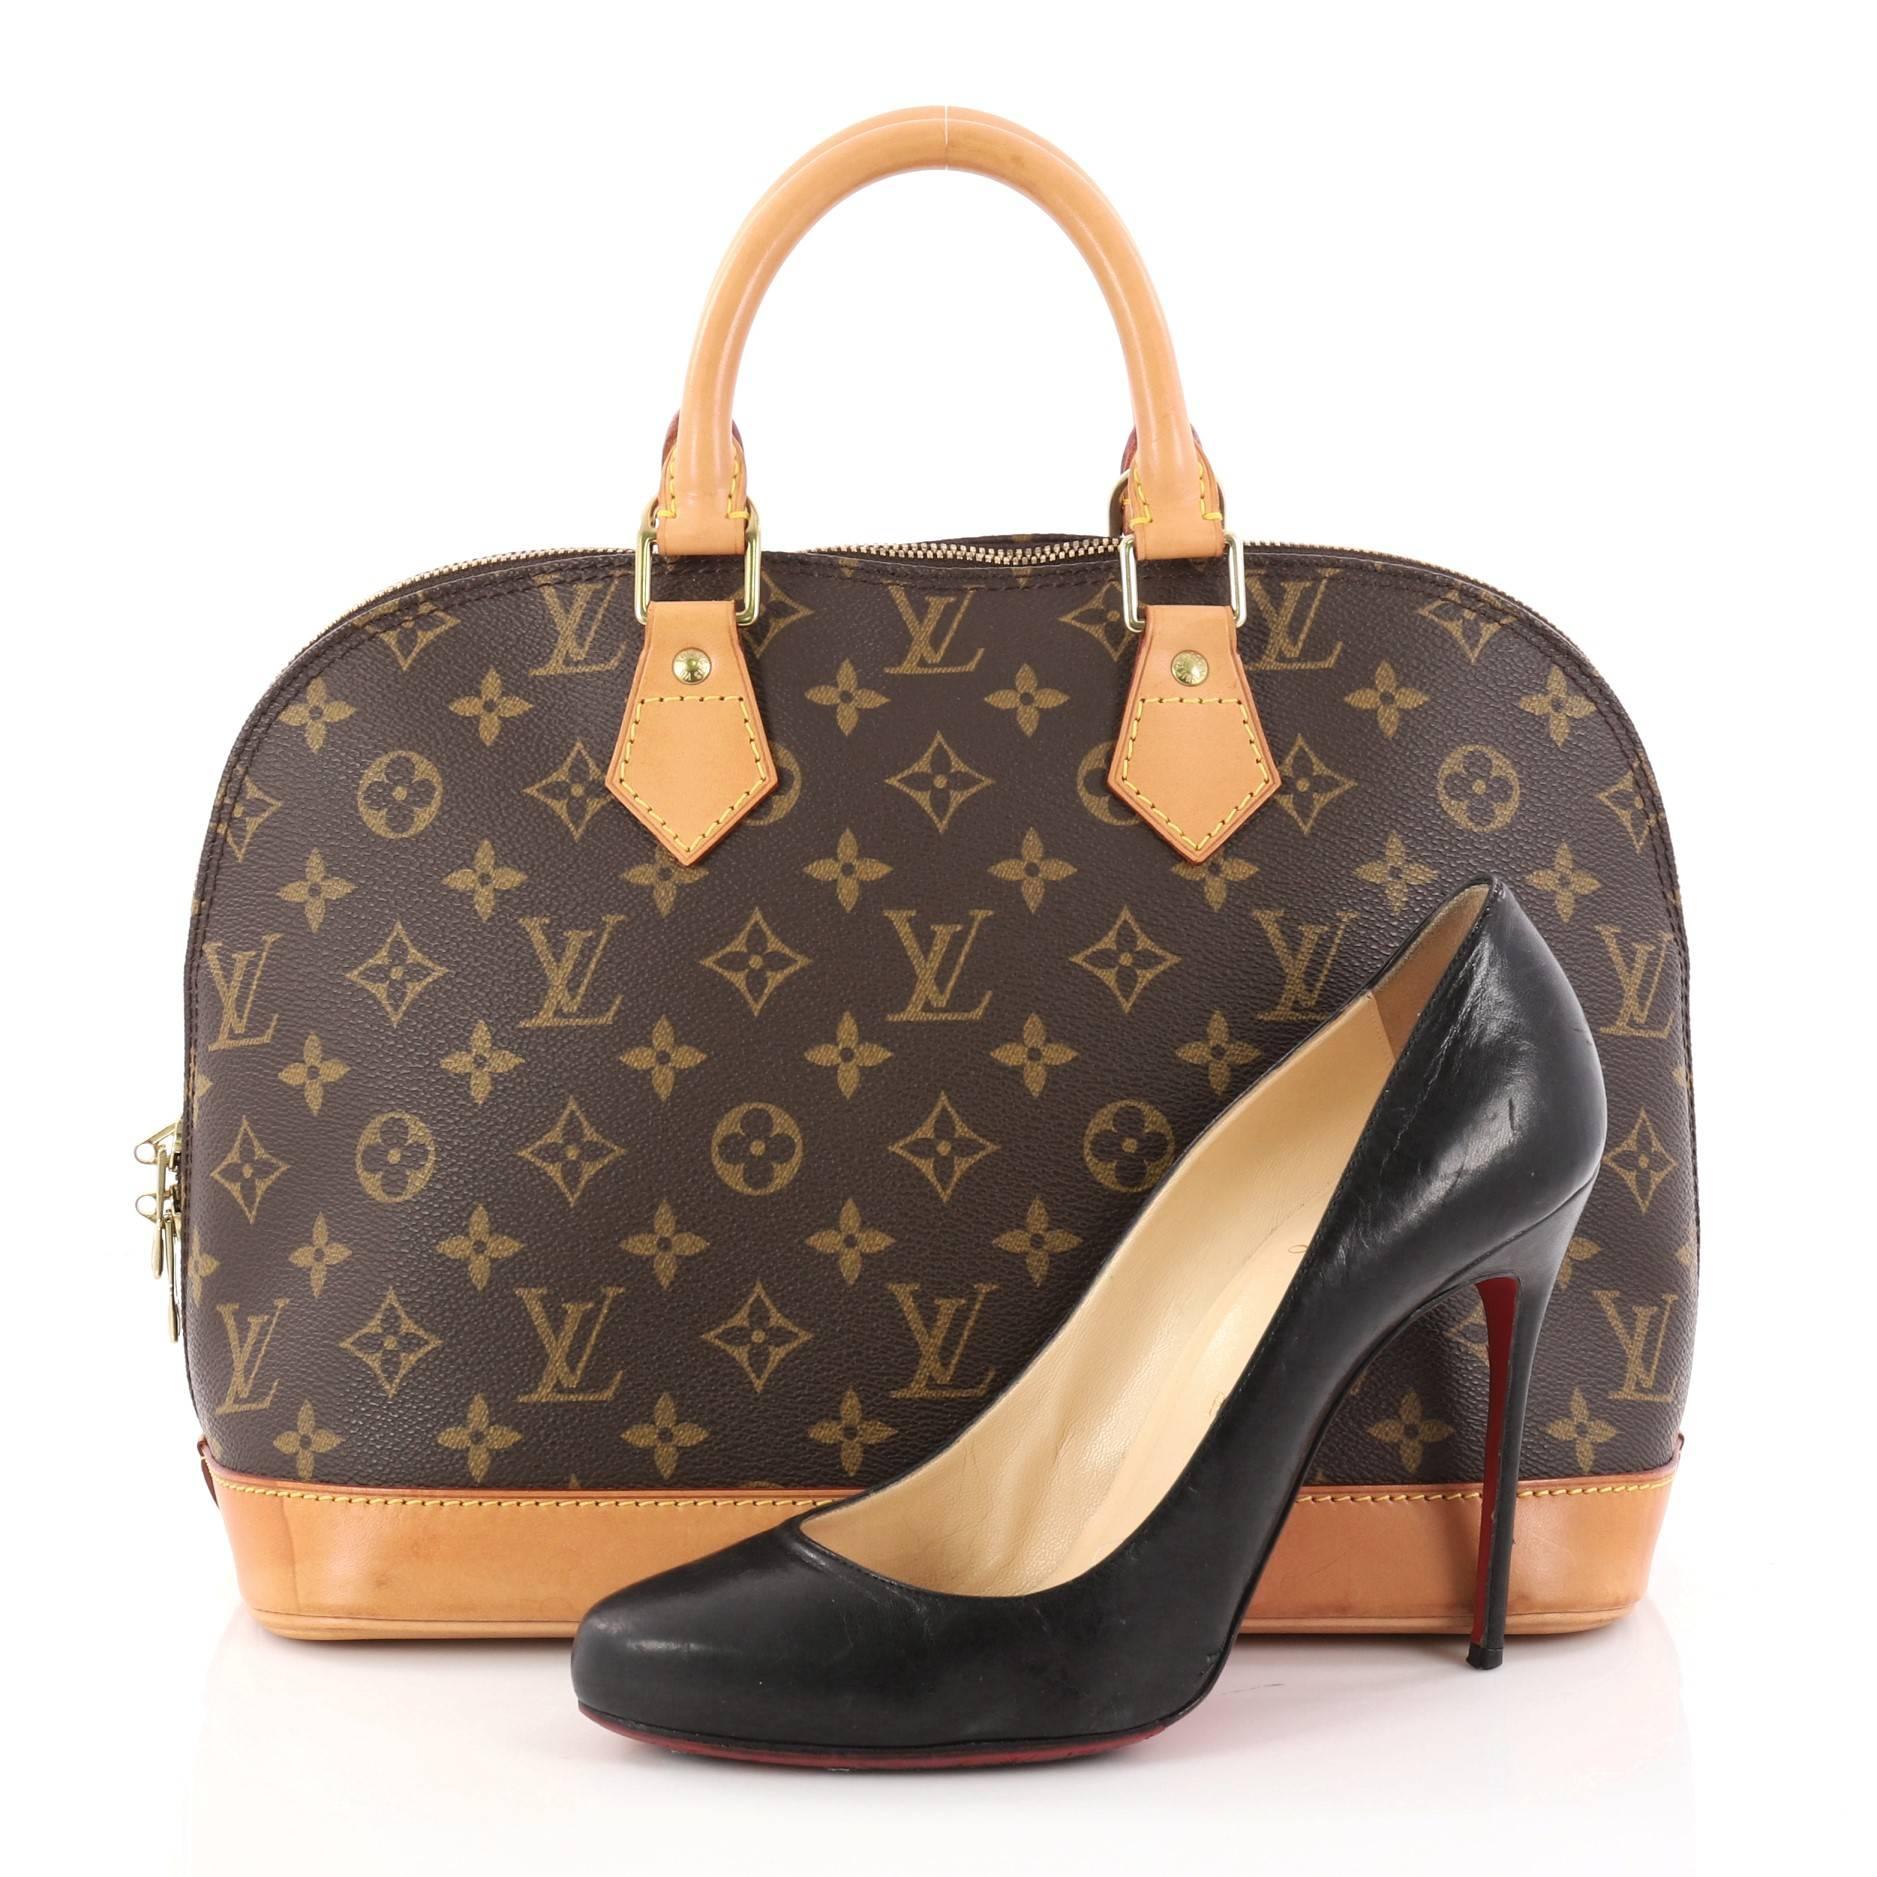 This authentic Louis Vuitton Vintage Alma Handbag Monogram Canvas PM is perfect for everyday use. Crafted in iconic brown monogram coated canvas, this dome-shaped satchel showcases dual-rolled handles, cowhide leather trims, sturdy base and